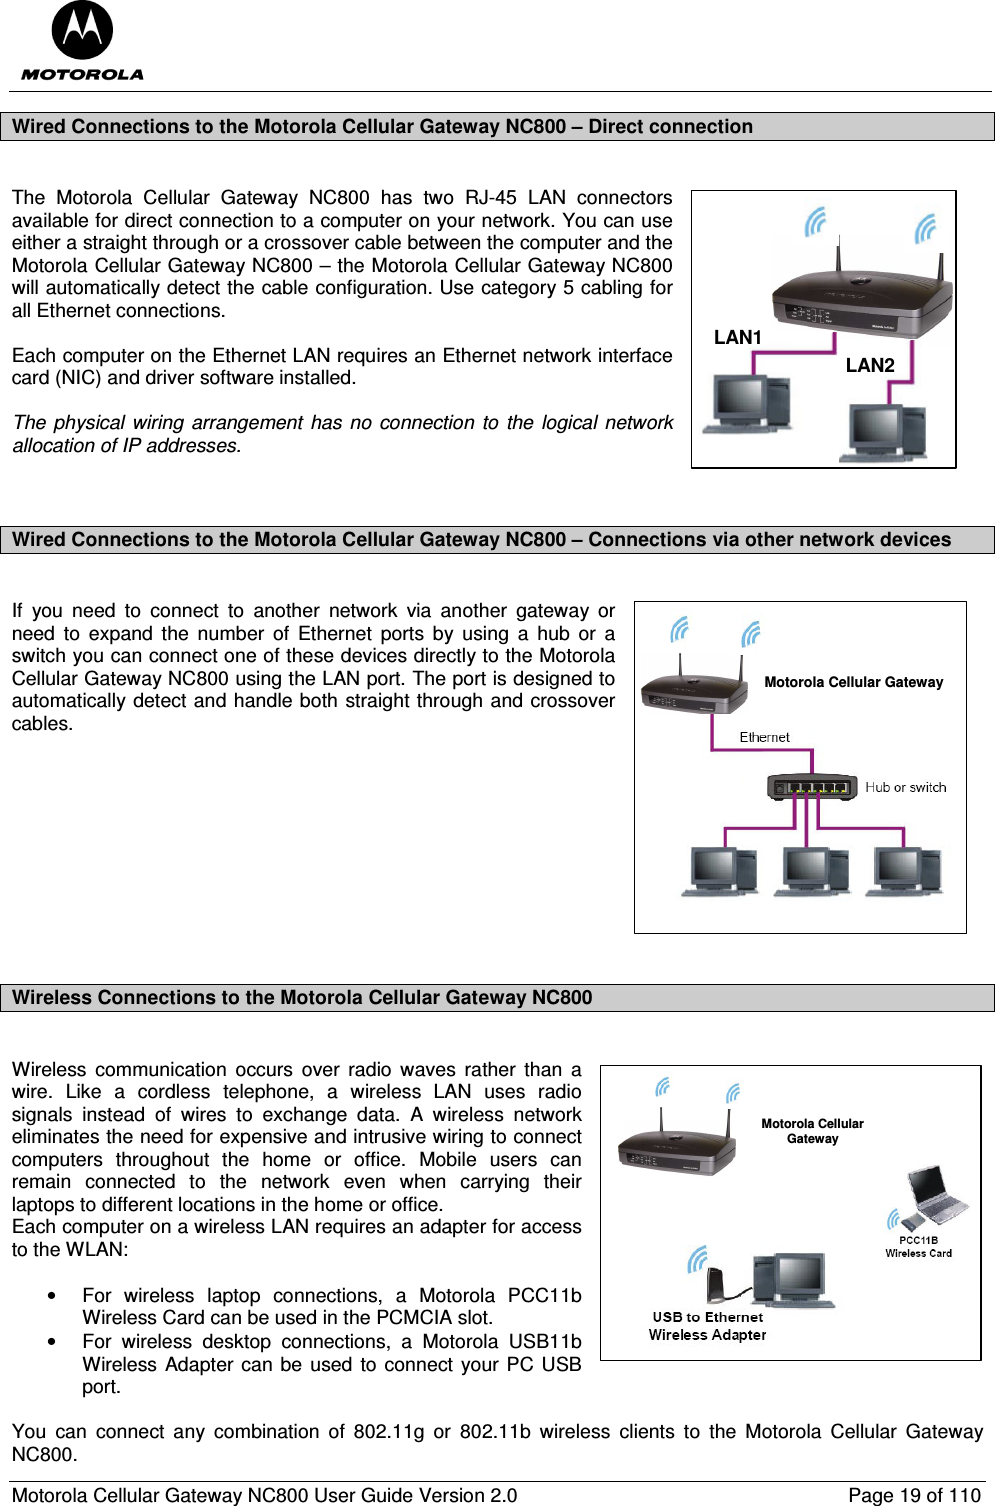  Motorola Cellular Gateway NC800 User Guide Version 2.0     Page 19 of 110  Wired Connections to the Motorola Cellular Gateway NC800 – Direct connection  The  Motorola  Cellular  Gateway  NC800  has  two  RJ-45  LAN  connectors available for direct connection to a computer on your network. You can use either a straight through or a crossover cable between the computer and the Motorola Cellular Gateway NC800 – the Motorola Cellular Gateway NC800 will automatically detect the cable configuration. Use category 5 cabling for all Ethernet connections.  Each computer on the Ethernet LAN requires an Ethernet network interface card (NIC) and driver software installed.  The  physical  wiring  arrangement  has  no  connection  to  the  logical  network allocation of IP addresses.   Wired Connections to the Motorola Cellular Gateway NC800 – Connections via other network devices   If  you  need  to  connect  to  another  network  via  another  gateway  or need  to  expand  the  number  of  Ethernet  ports  by  using  a  hub  or  a switch you can connect one of these devices directly to the Motorola Cellular Gateway NC800 using the LAN port. The port is designed to automatically detect and handle both straight through and crossover cables.           Wireless Connections to the Motorola Cellular Gateway NC800  Wireless  communication  occurs  over  radio  waves  rather  than  a wire.  Like  a  cordless  telephone,  a  wireless LAN  uses  radio signals  instead  of  wires  to  exchange  data.  A  wireless  network eliminates the need for expensive and intrusive wiring to connect computers  throughout  the  home  or  office.  Mobile  users  can remain  connected  to  the  network  even  when  carrying  their laptops to different locations in the home or office. Each computer on a wireless LAN requires an adapter for access to the WLAN:  •  For  wireless  laptop  connections,  a  Motorola  PCC11b Wireless Card can be used in the PCMCIA slot. •  For  wireless  desktop  connections,  a  Motorola  USB11b Wireless Adapter can be used to connect your PC USB port.  You  can  connect  any  combination  of  802.11g  or  802.11b  wireless  clients  to  the  Motorola  Cellular  Gateway NC800. LAN1LAN2Motorola Cellular GatewayMotorola CellularGateway